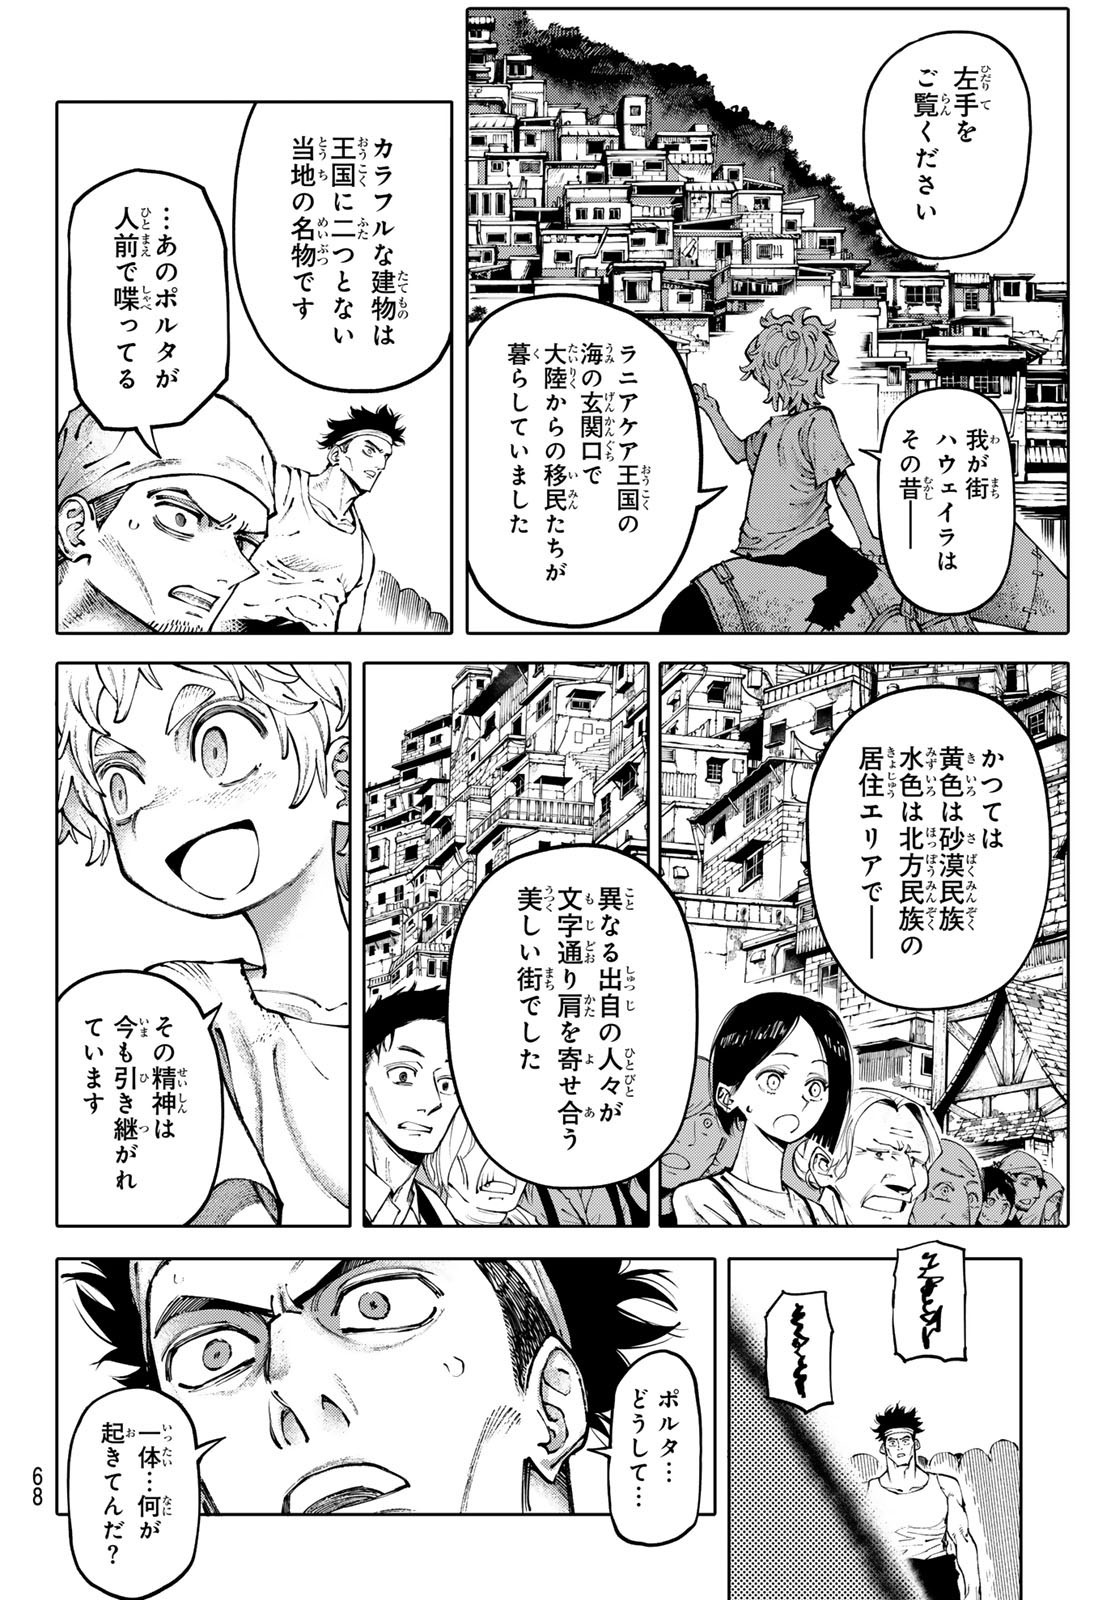 Weekly Shōnen Magazine - 週刊少年マガジン - Chapter 2024-34 - Page 65